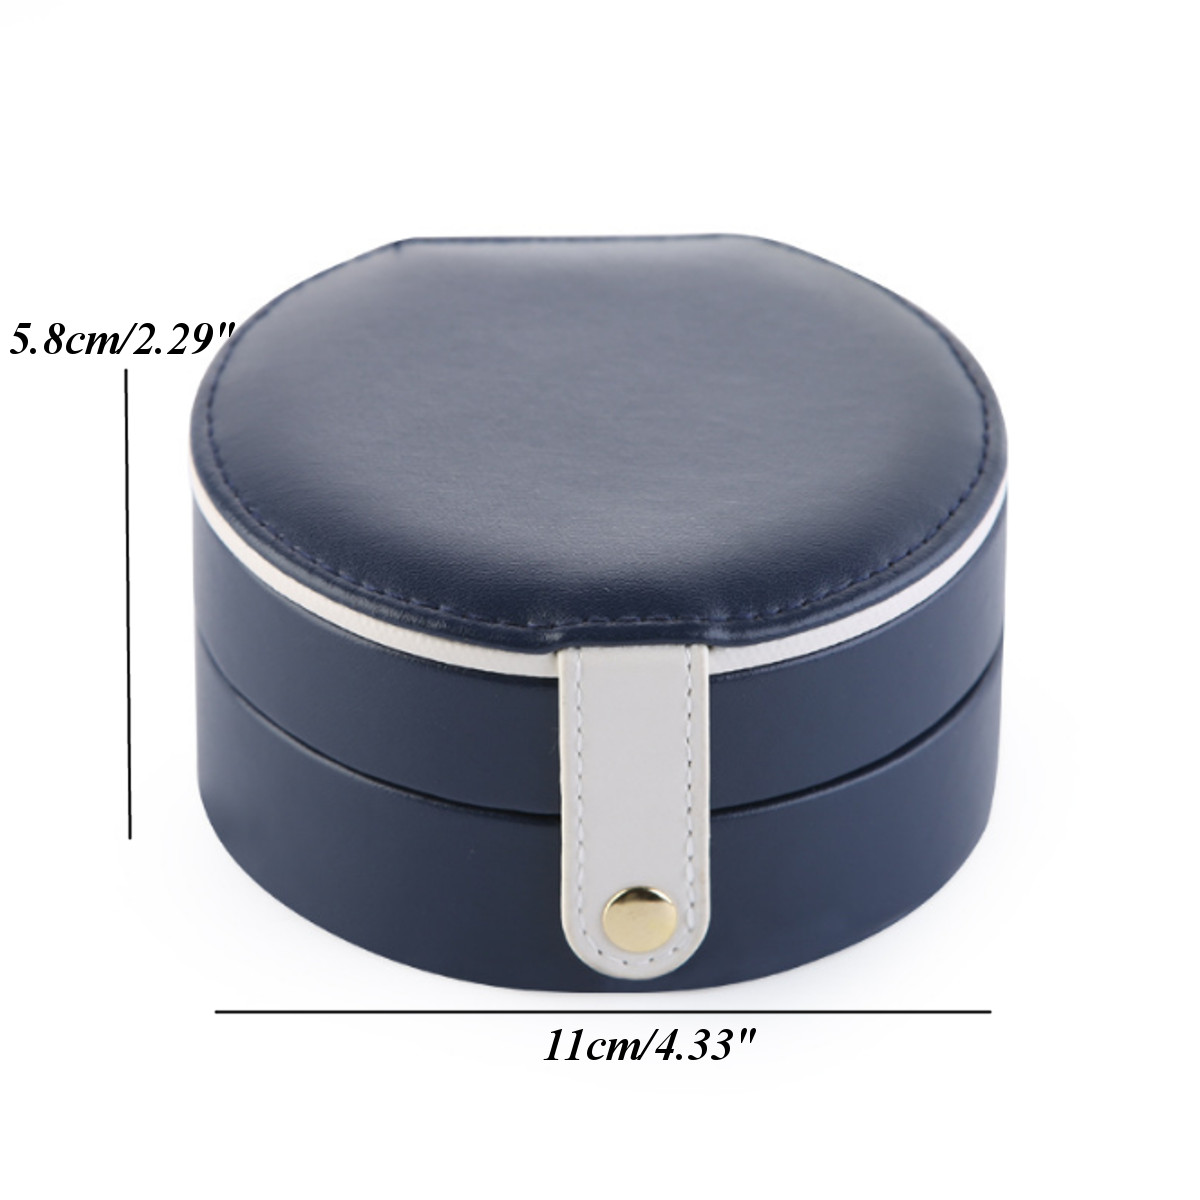 Portable-Travel-Round-Multi-Layer-Jewelry-Box-Leather-Stud-Earrings-Jewellery-Ornaments-Storage-Case-1442428-5